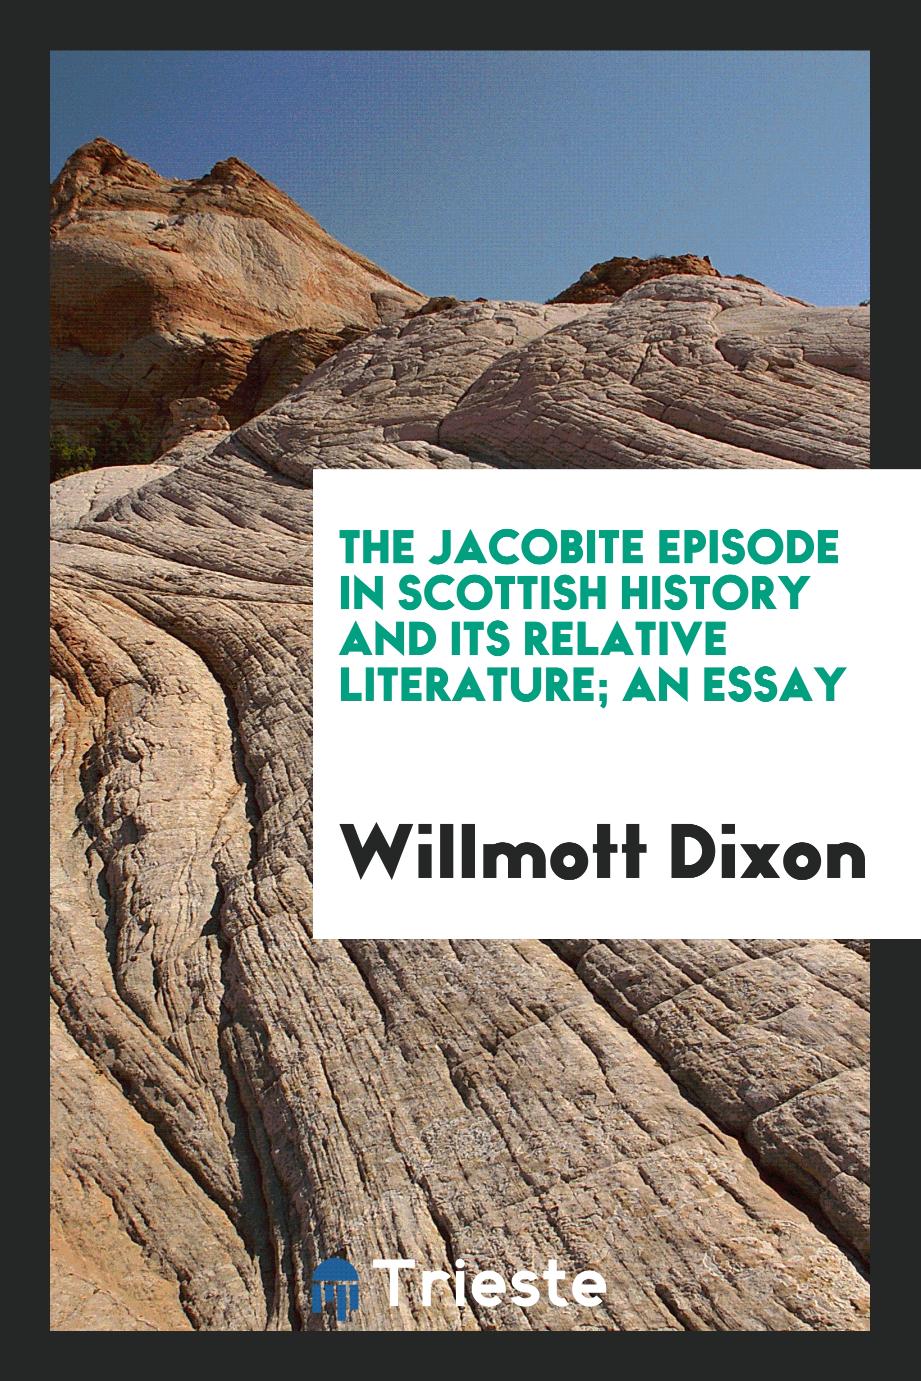 The Jacobite episode in Scottish history and its relative literature; an essay